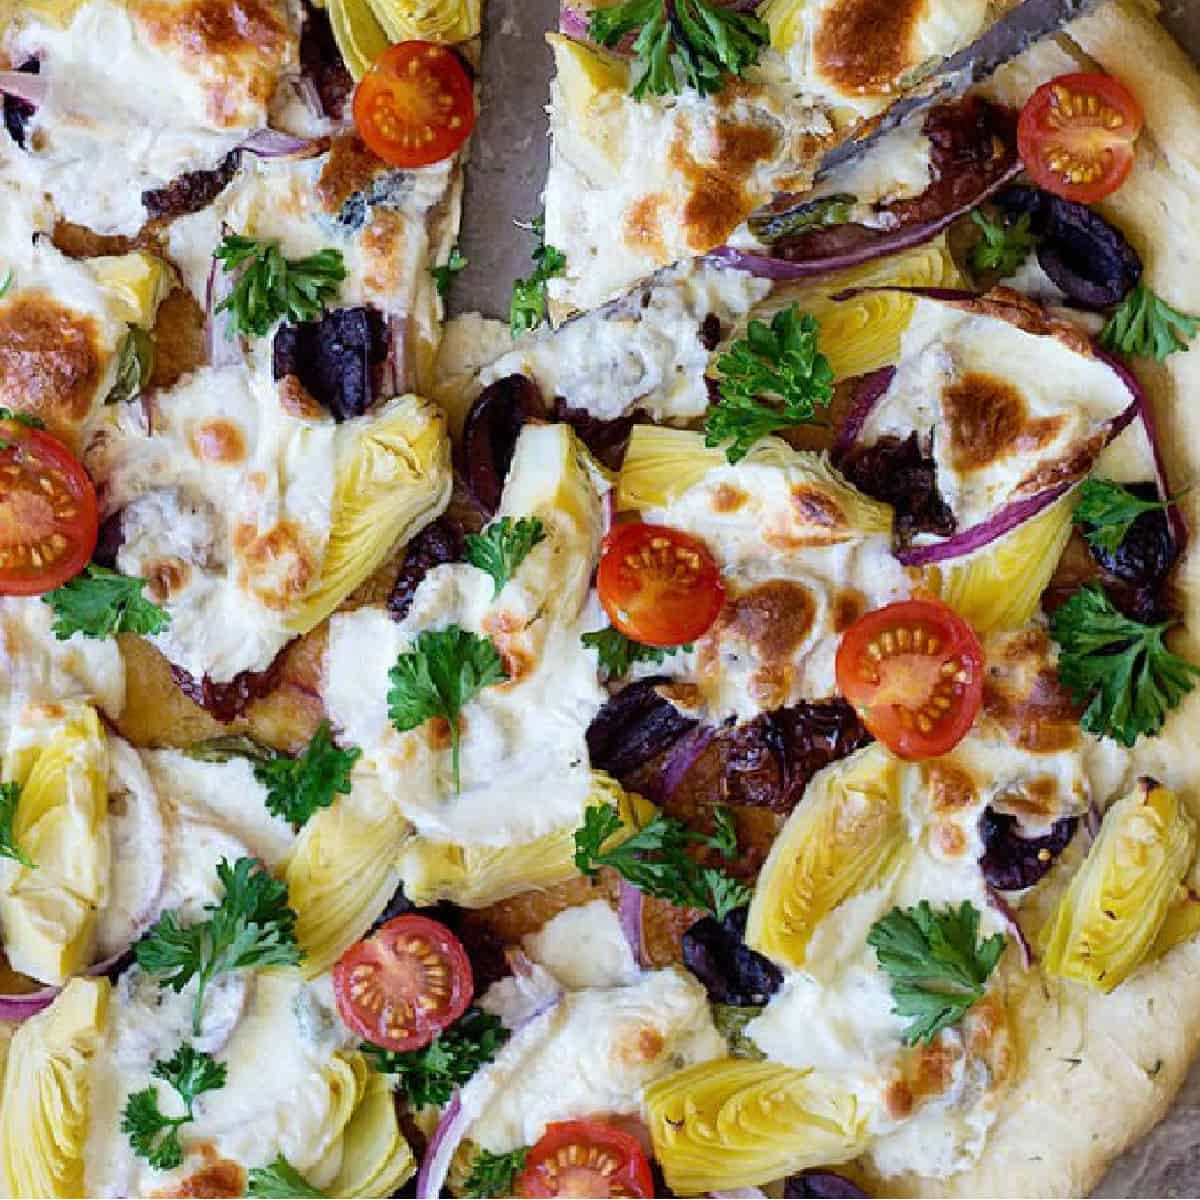 Mediterranean pizza is the ultimate easy fresh family dinner that everyone will devour. This is a delicious homemade pizza recipe with different Mediterranean toppings that would knock your socks off! 
